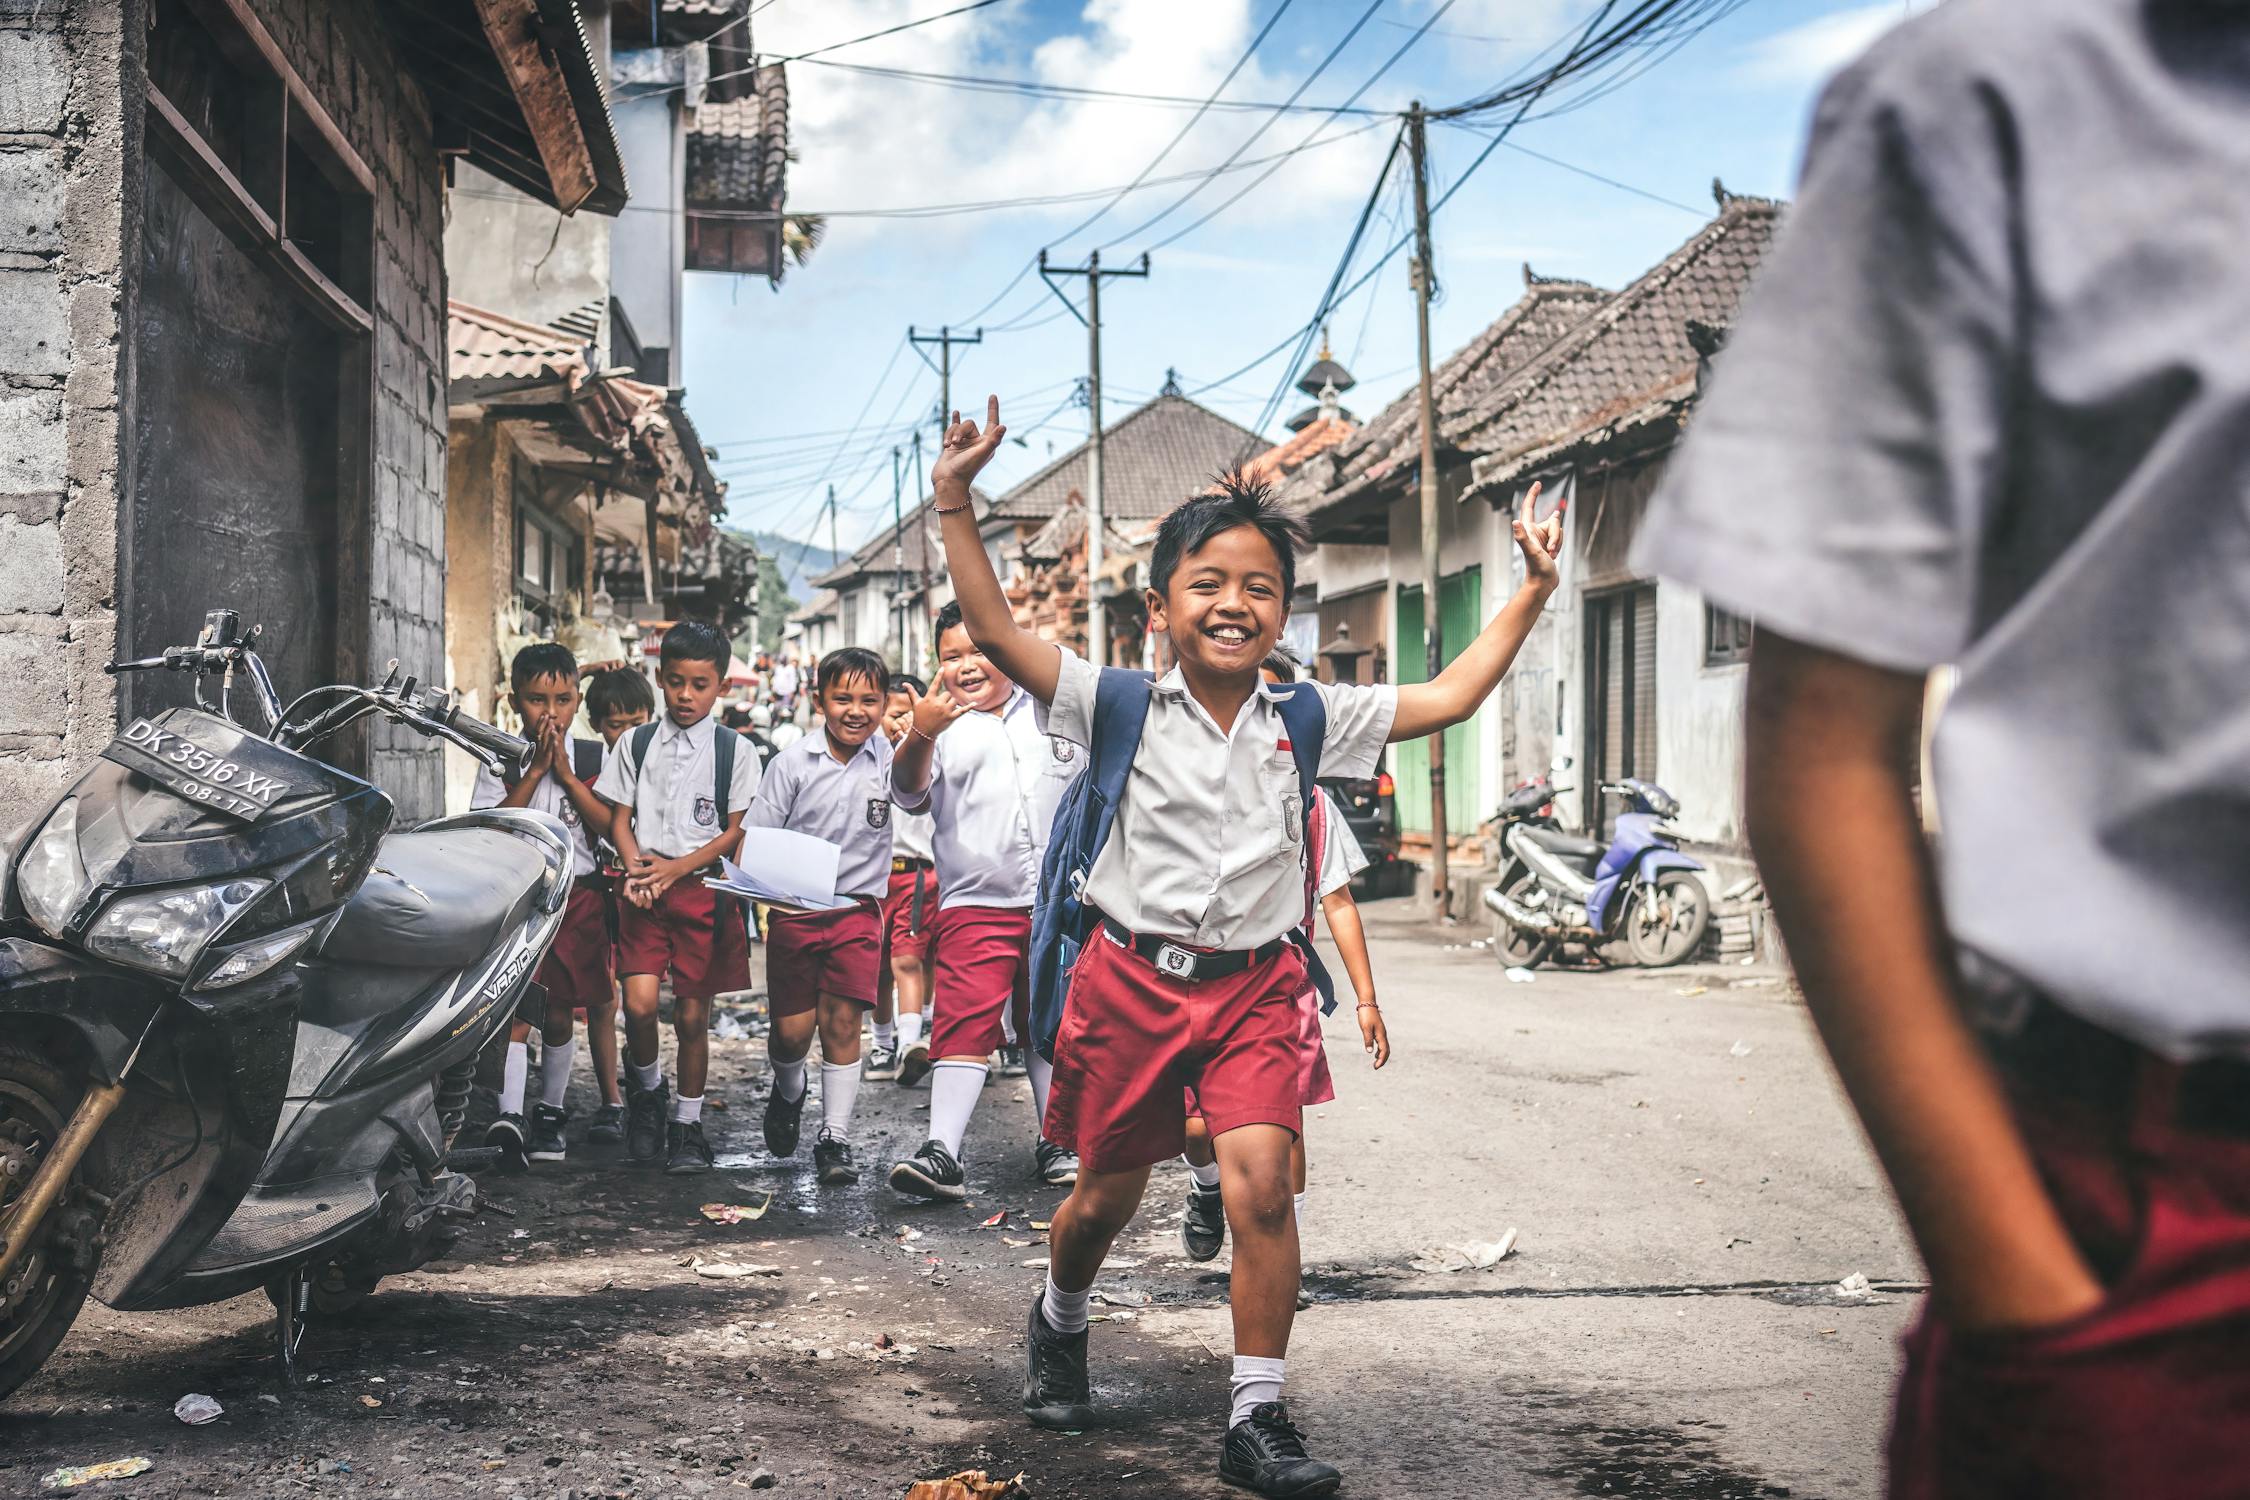 Human Rights by Photo by Artem Beliaikin from Pexels: https://www.pexels.com/photo/boy-in-white-and-red-school-uniform-raising-hands-outdoors-1153976/